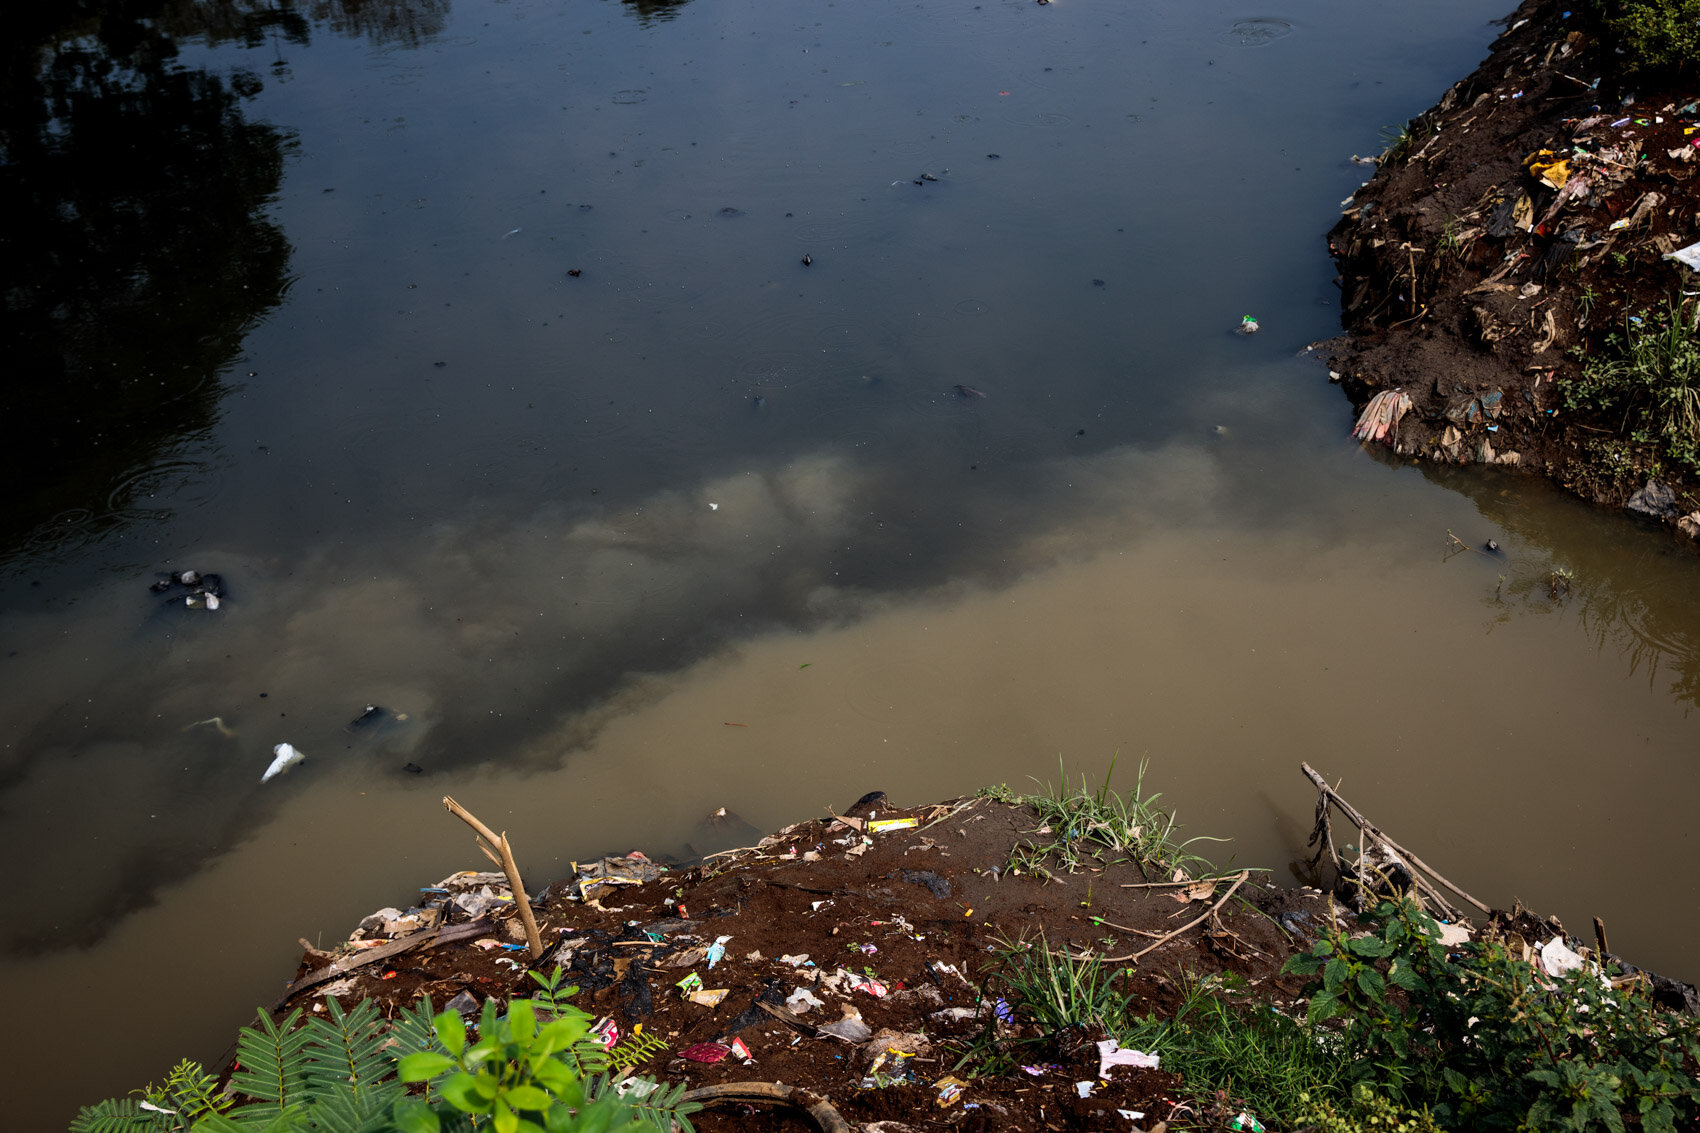  BANDUNG, INDONESIA: Discoloured black and brown water mix at tributary of the Citarum River on November 22nd, 2019 in Bandung, Java, Indonesia. 